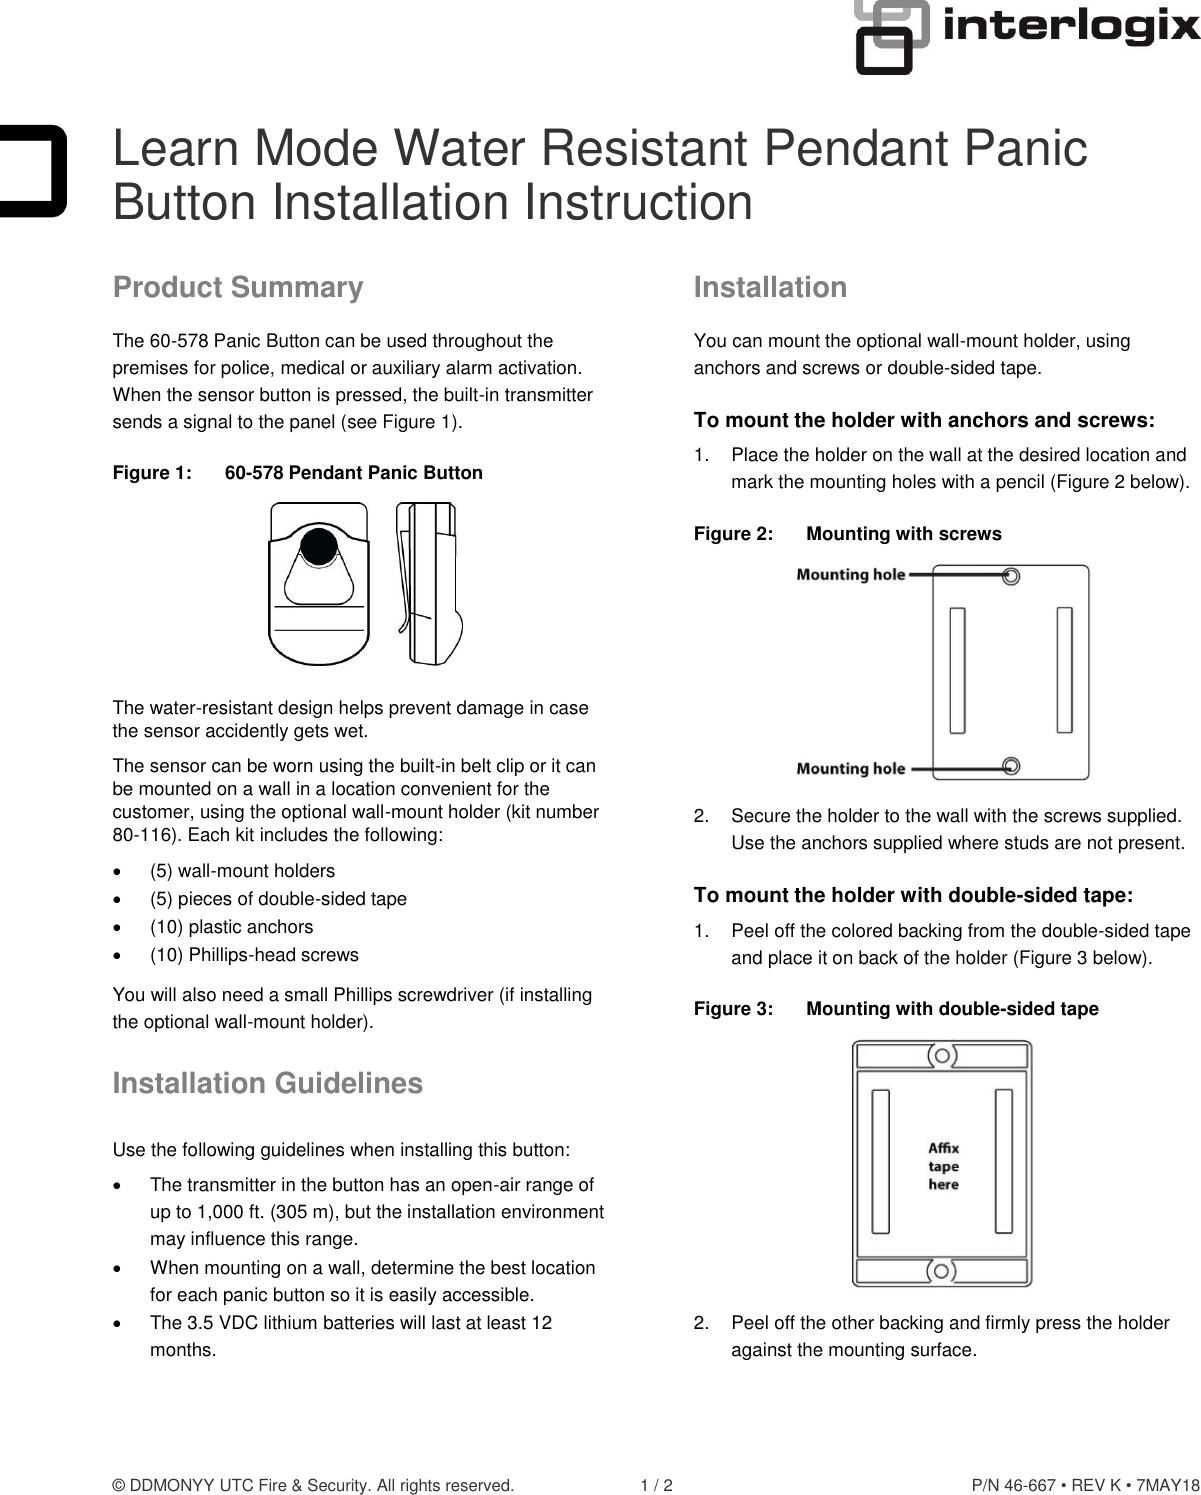 © DDMONYY UTC Fire &amp; Security. All rights reserved.  1 / 2  P/N 46-667 • REV K • 7MAY18  Learn Mode Water Resistant Pendant Panic Button Installation Instruction Product Summary The 60-578 Panic Button can be used throughout the premises for police, medical or auxiliary alarm activation. When the sensor button is pressed, the built-in transmitter sends a signal to the panel (see Figure 1). Figure 1:  60-578 Pendant Panic Button  The water-resistant design helps prevent damage in case the sensor accidently gets wet. The sensor can be worn using the built-in belt clip or it can be mounted on a wall in a location convenient for the customer, using the optional wall-mount holder (kit number 80-116). Each kit includes the following:   (5) wall-mount holders   (5) pieces of double-sided tape   (10) plastic anchors   (10) Phillips-head screws You will also need a small Phillips screwdriver (if installing the optional wall-mount holder). Installation Guidelines Use the following guidelines when installing this button:   The transmitter in the button has an open-air range of up to 1,000 ft. (305 m), but the installation environment may influence this range.   When mounting on a wall, determine the best location for each panic button so it is easily accessible.   The 3.5 VDC lithium batteries will last at least 12 months. Installation You can mount the optional wall-mount holder, using anchors and screws or double-sided tape. To mount the holder with anchors and screws: 1.  Place the holder on the wall at the desired location and mark the mounting holes with a pencil (Figure 2 below). Figure 2:  Mounting with screws  2.  Secure the holder to the wall with the screws supplied. Use the anchors supplied where studs are not present. To mount the holder with double-sided tape: 1.  Peel off the colored backing from the double-sided tape and place it on back of the holder (Figure 3 below). Figure 3:  Mounting with double-sided tape  2.  Peel off the other backing and firmly press the holder against the mounting surface.  